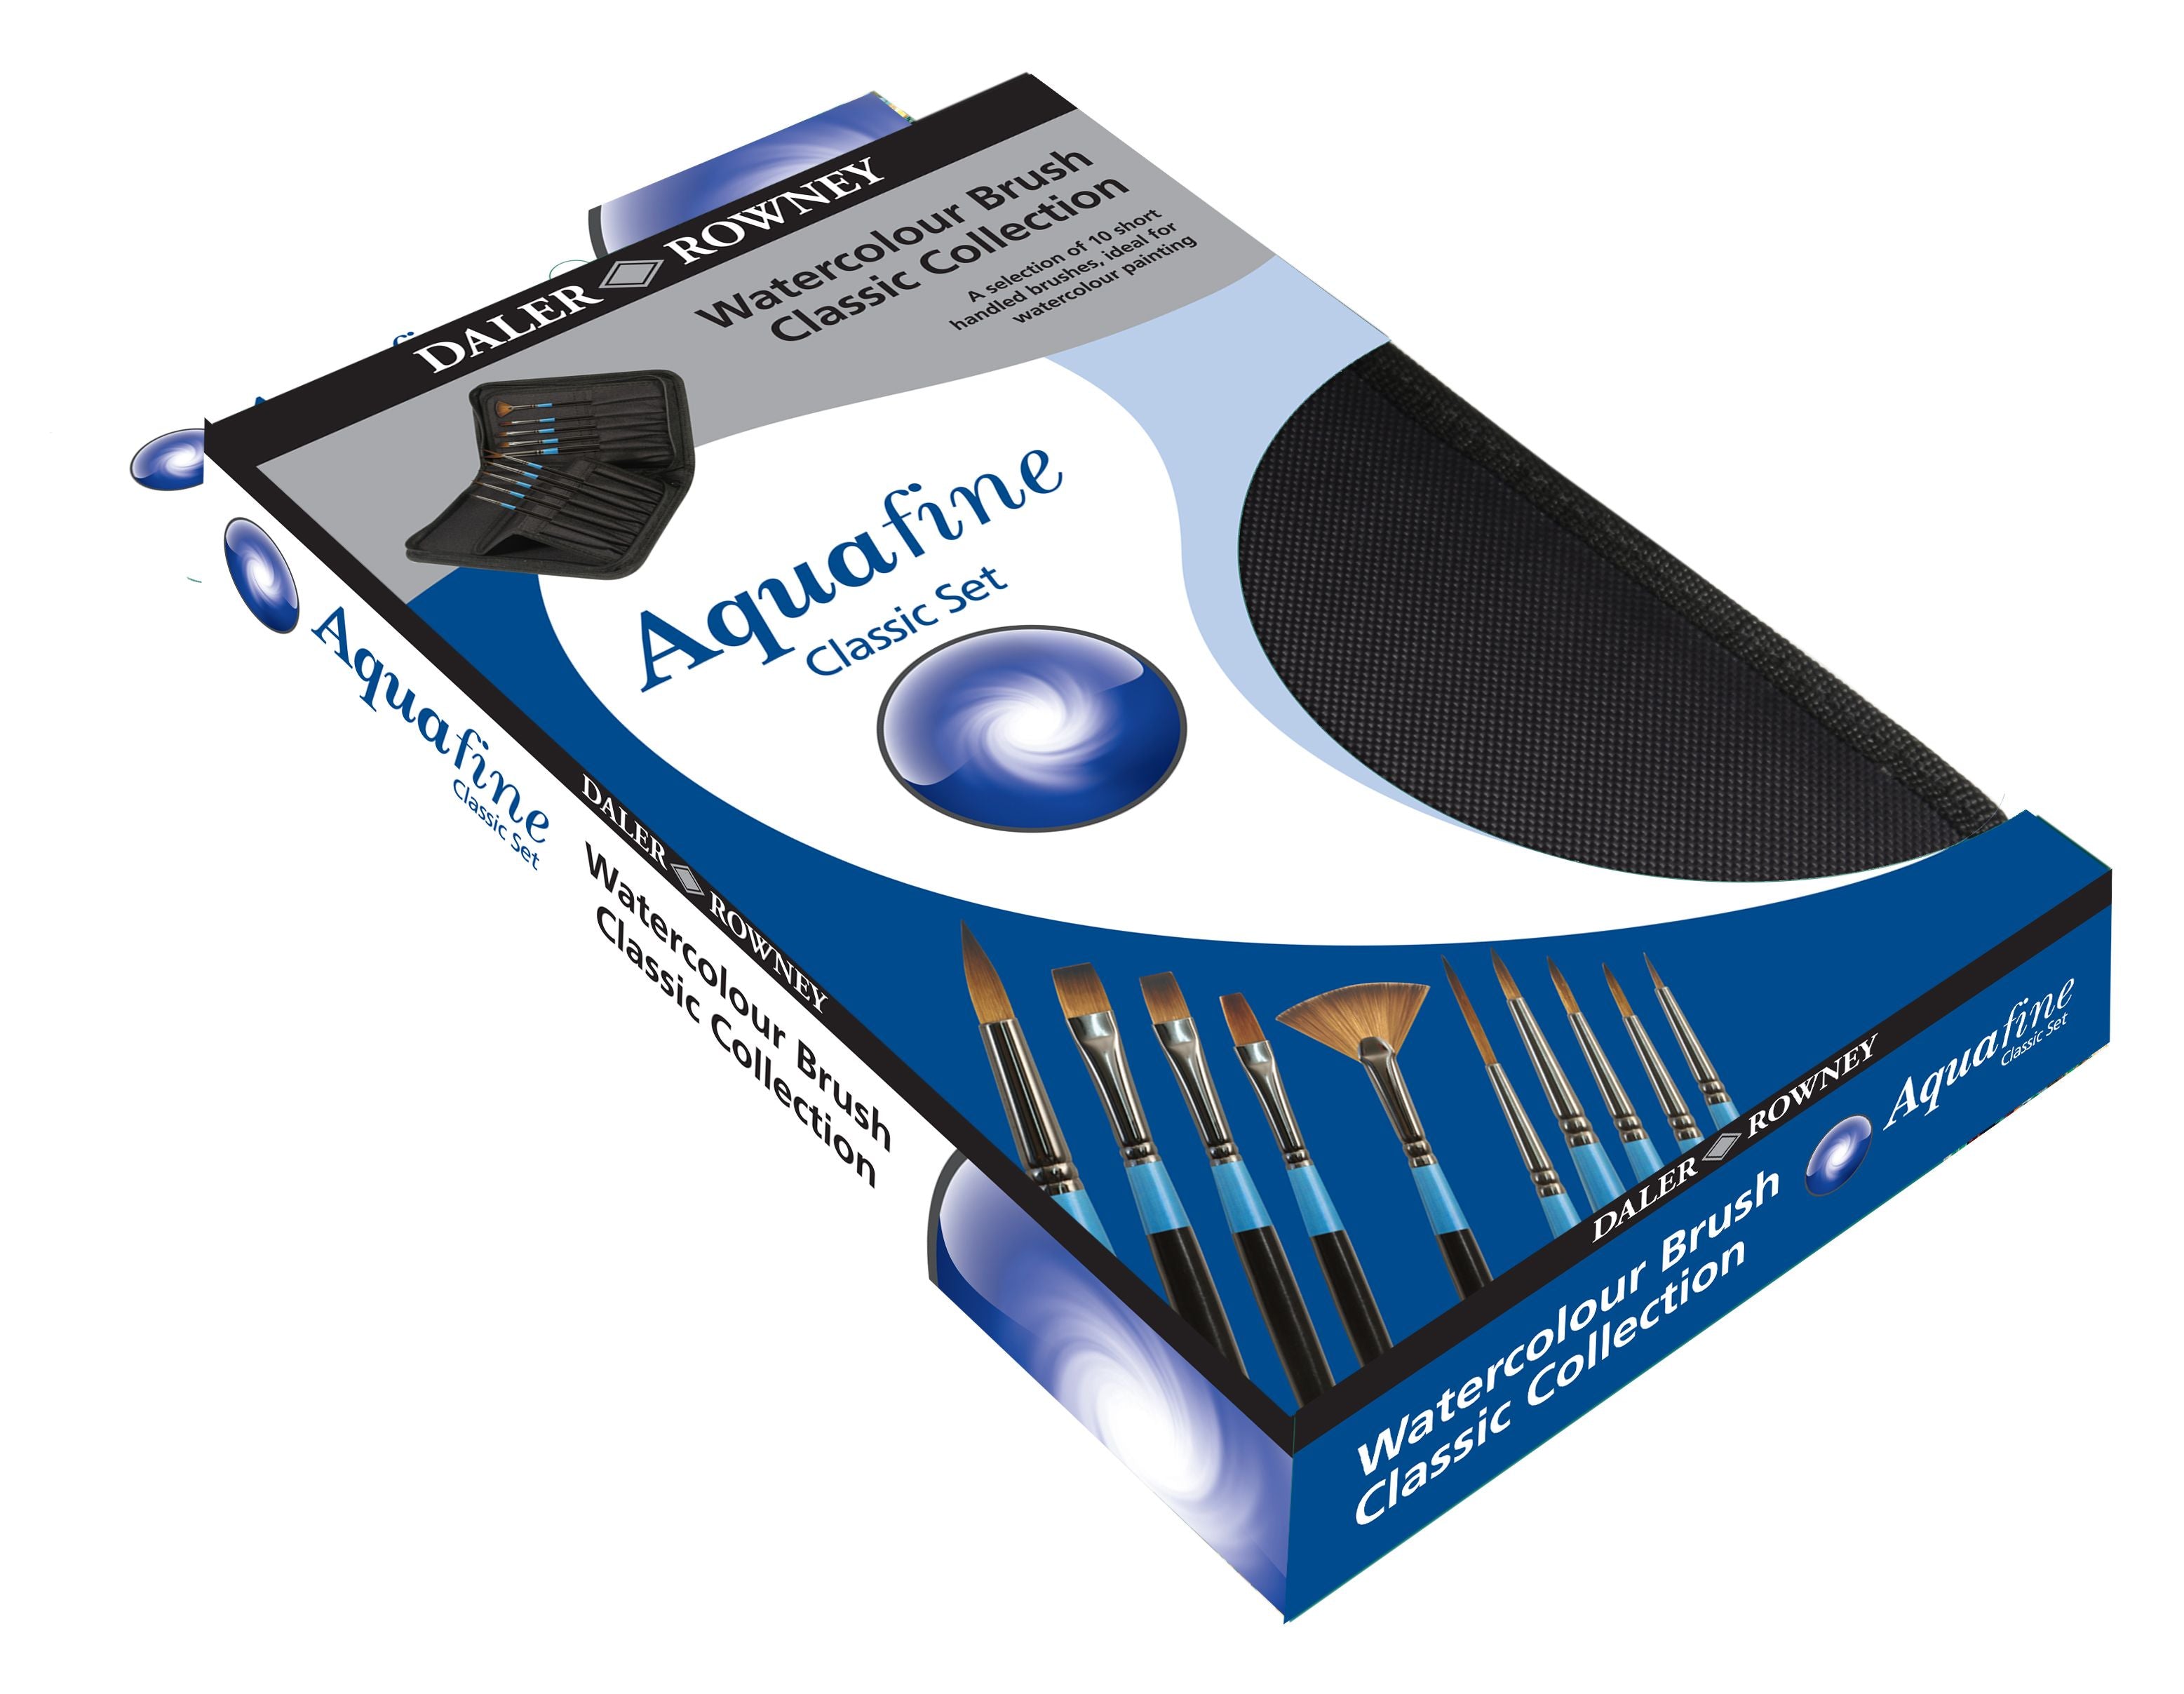 Daler Rowney Aquafine Watercolour Brush Aquafine Brushes is a comprehensive range of soft synthetic and natural hair brushes, ideal for watercolour artists.